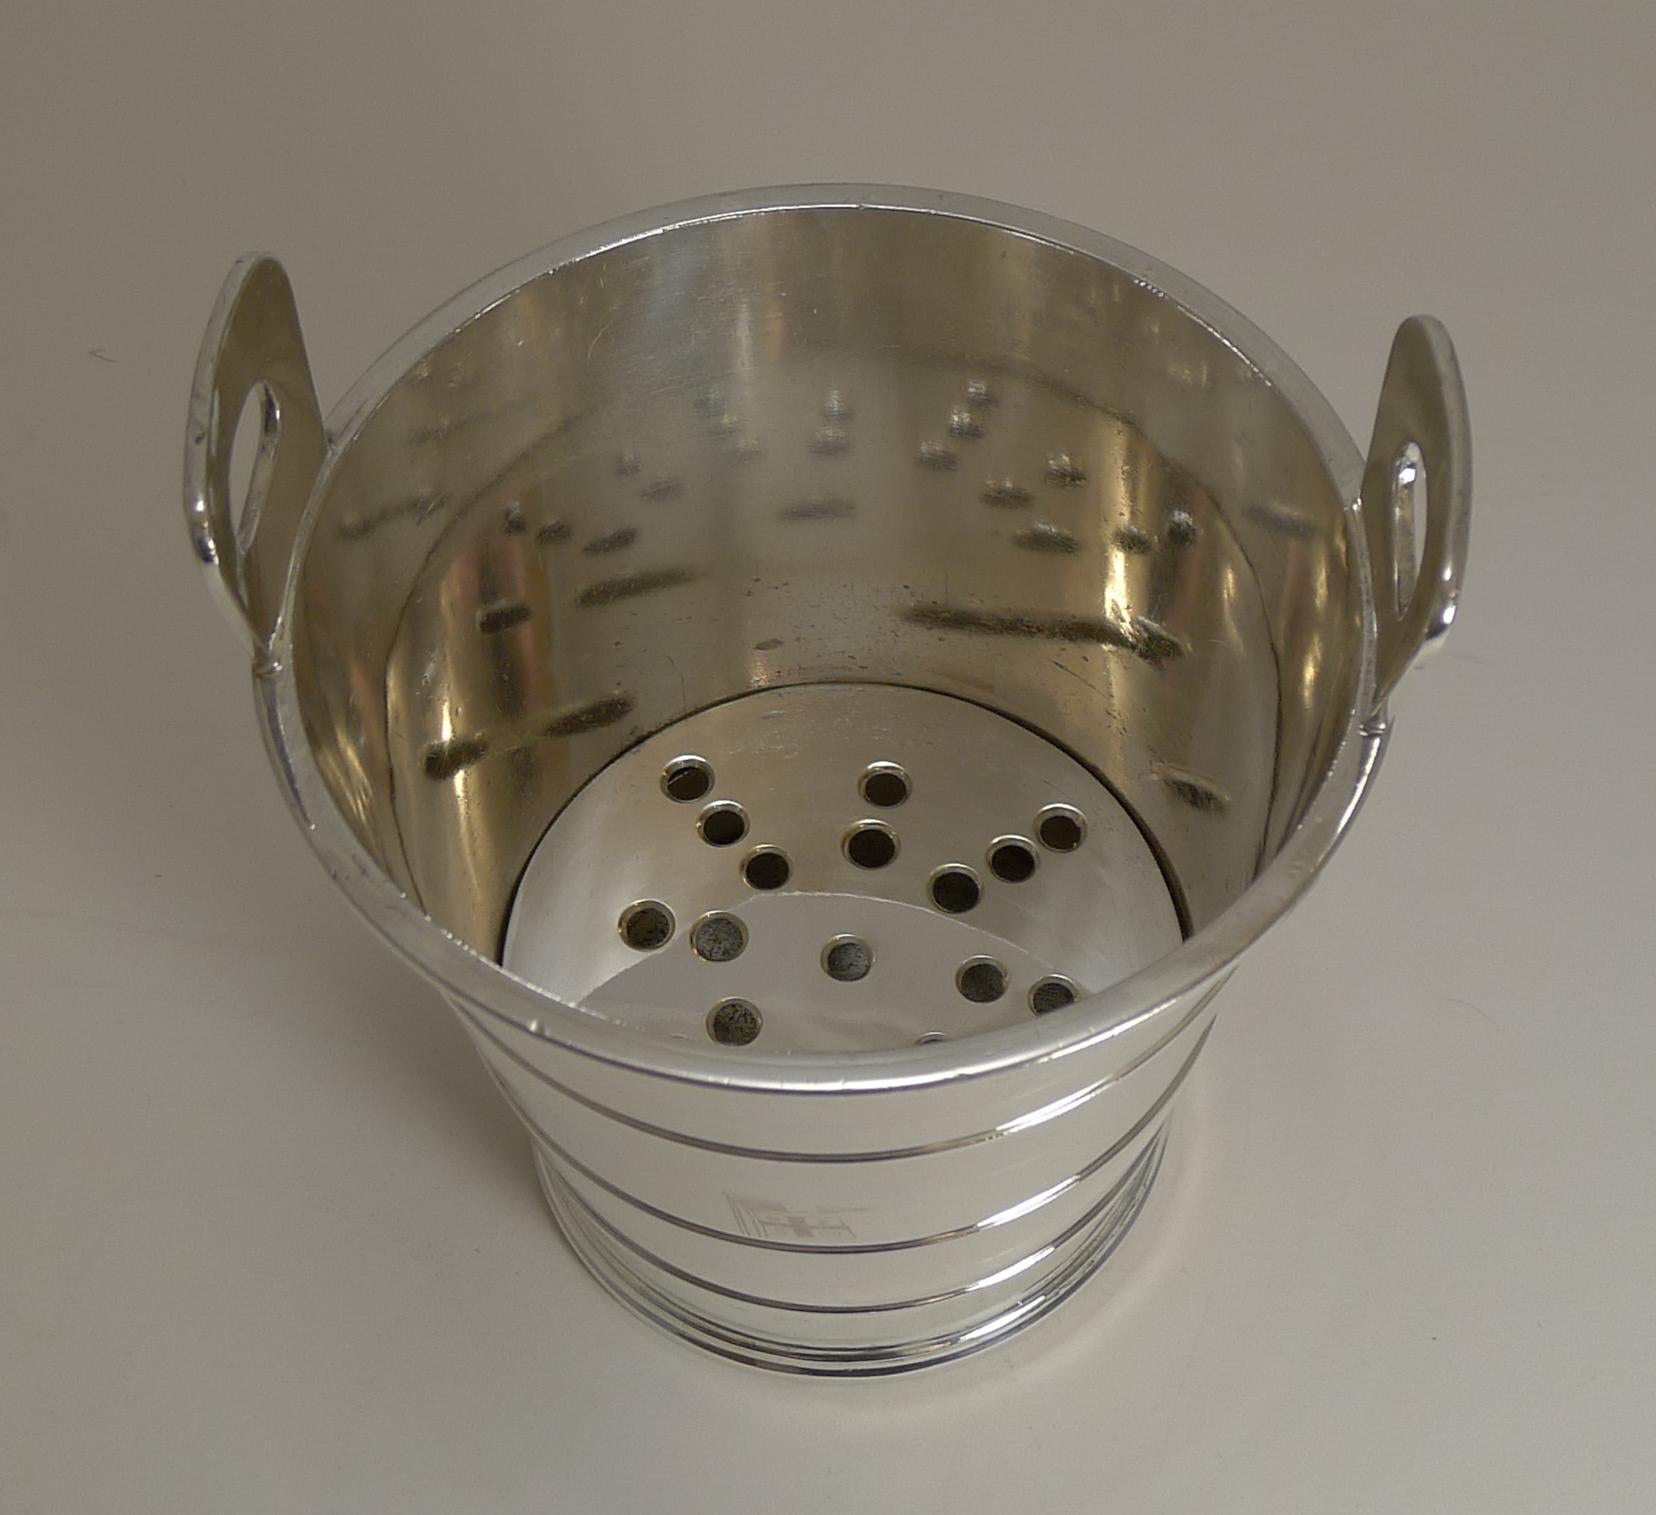 Edwardian Silver Plated Ice Bucket by Mappin and Webb, New Zealand Shipping Co.